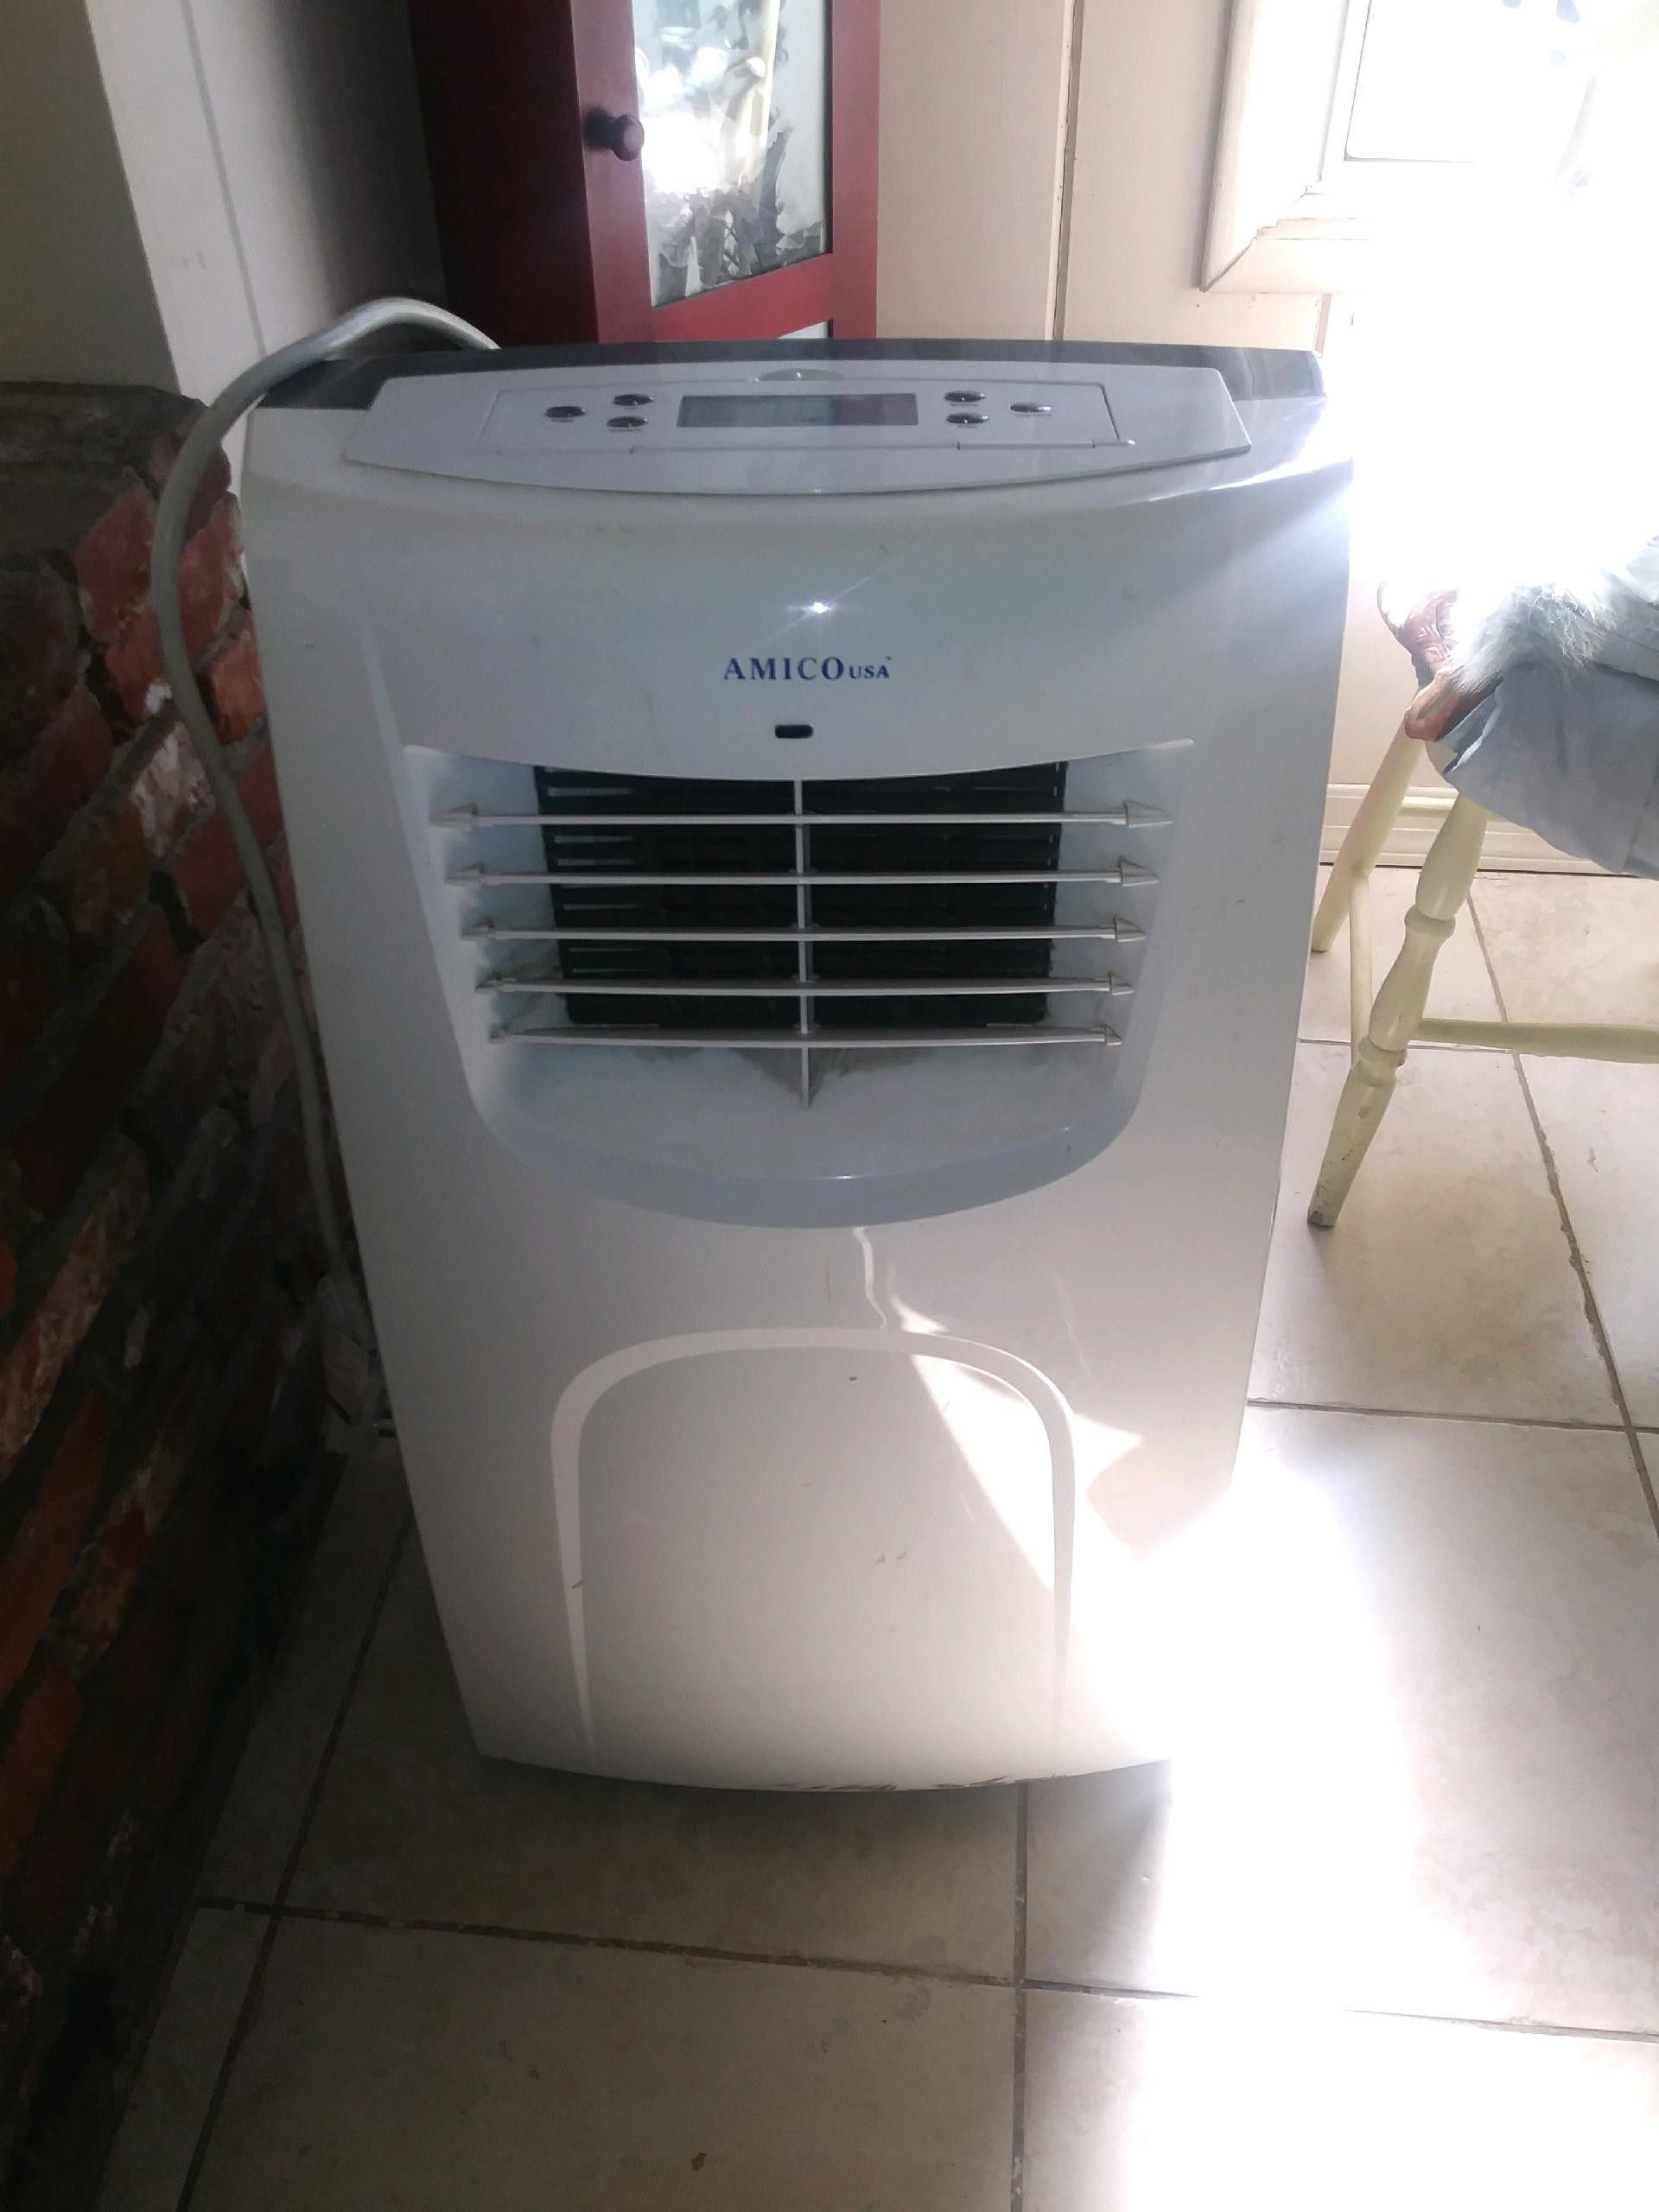 Only $125....NEW...."AMICO-u.s.a." ( portable A.C. unit)....perfect condition & powerful cooling system for scorching temperature seasons ahead!!!